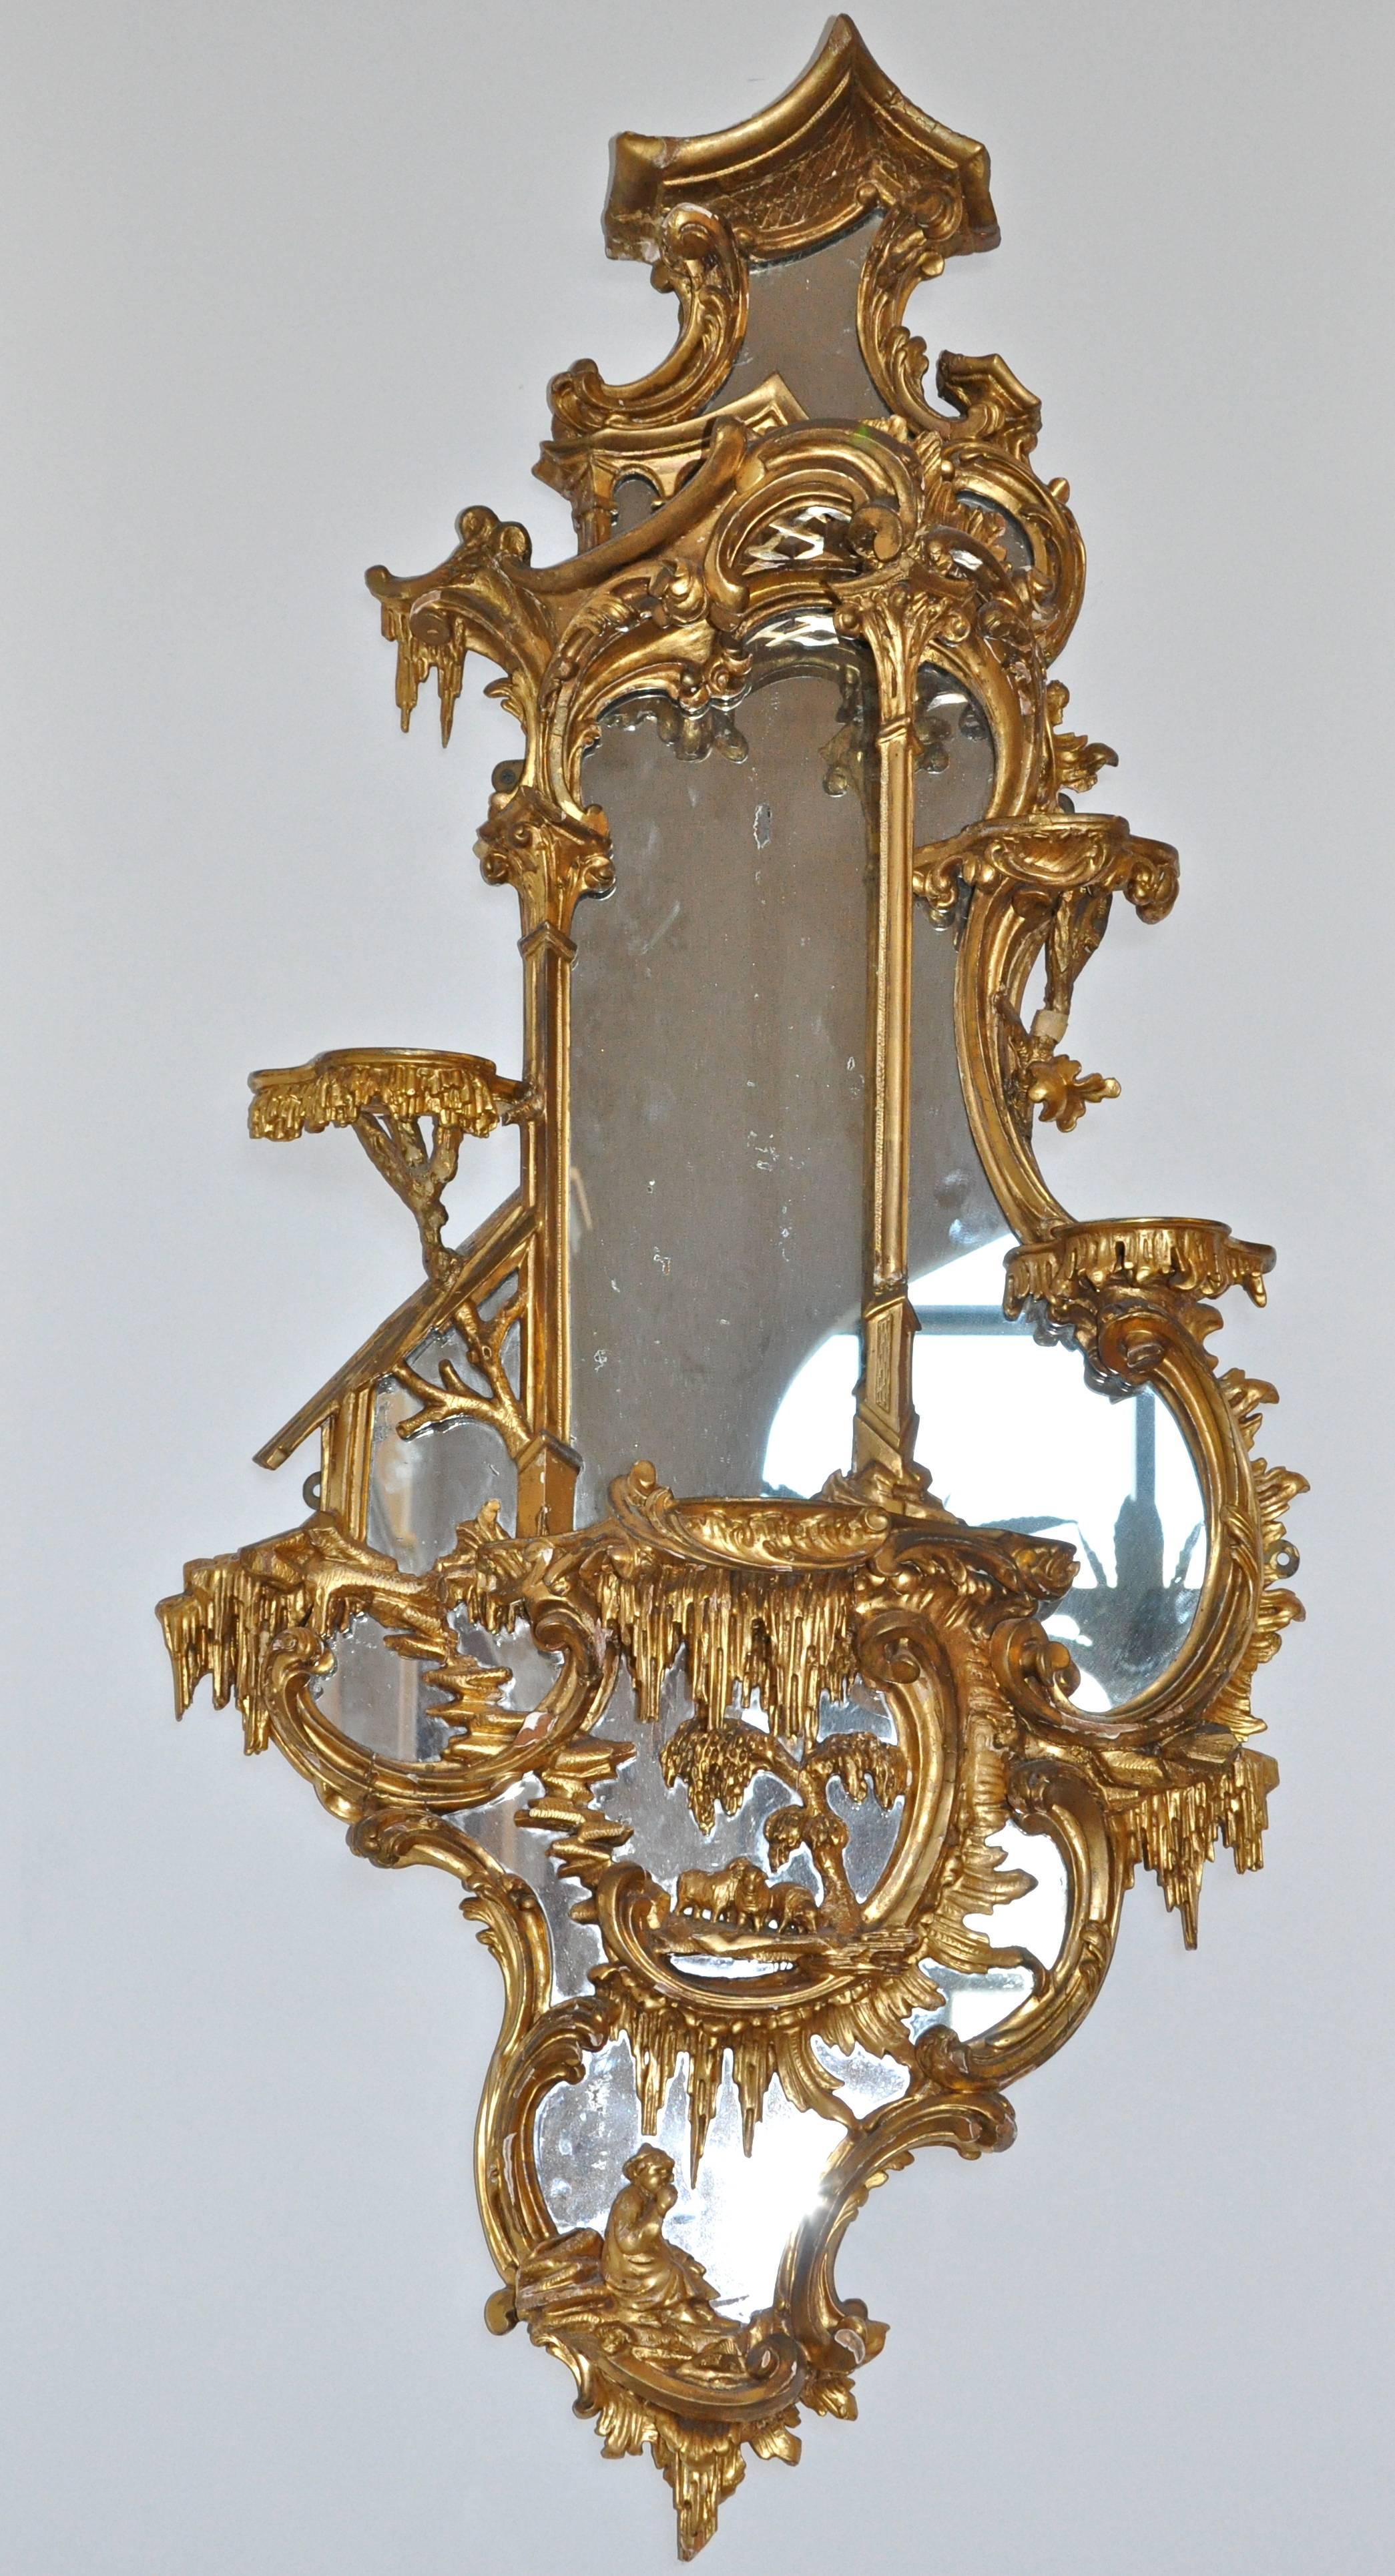 Pair of 18th century George III Gilt Chippendale mirror brackets

Attributed to the Master Carver, Thomas Johnson
Incredible carving of realistic flora and fauna. Seated Shepherdesses with carved lambs, rock cropping, water features and rocaille